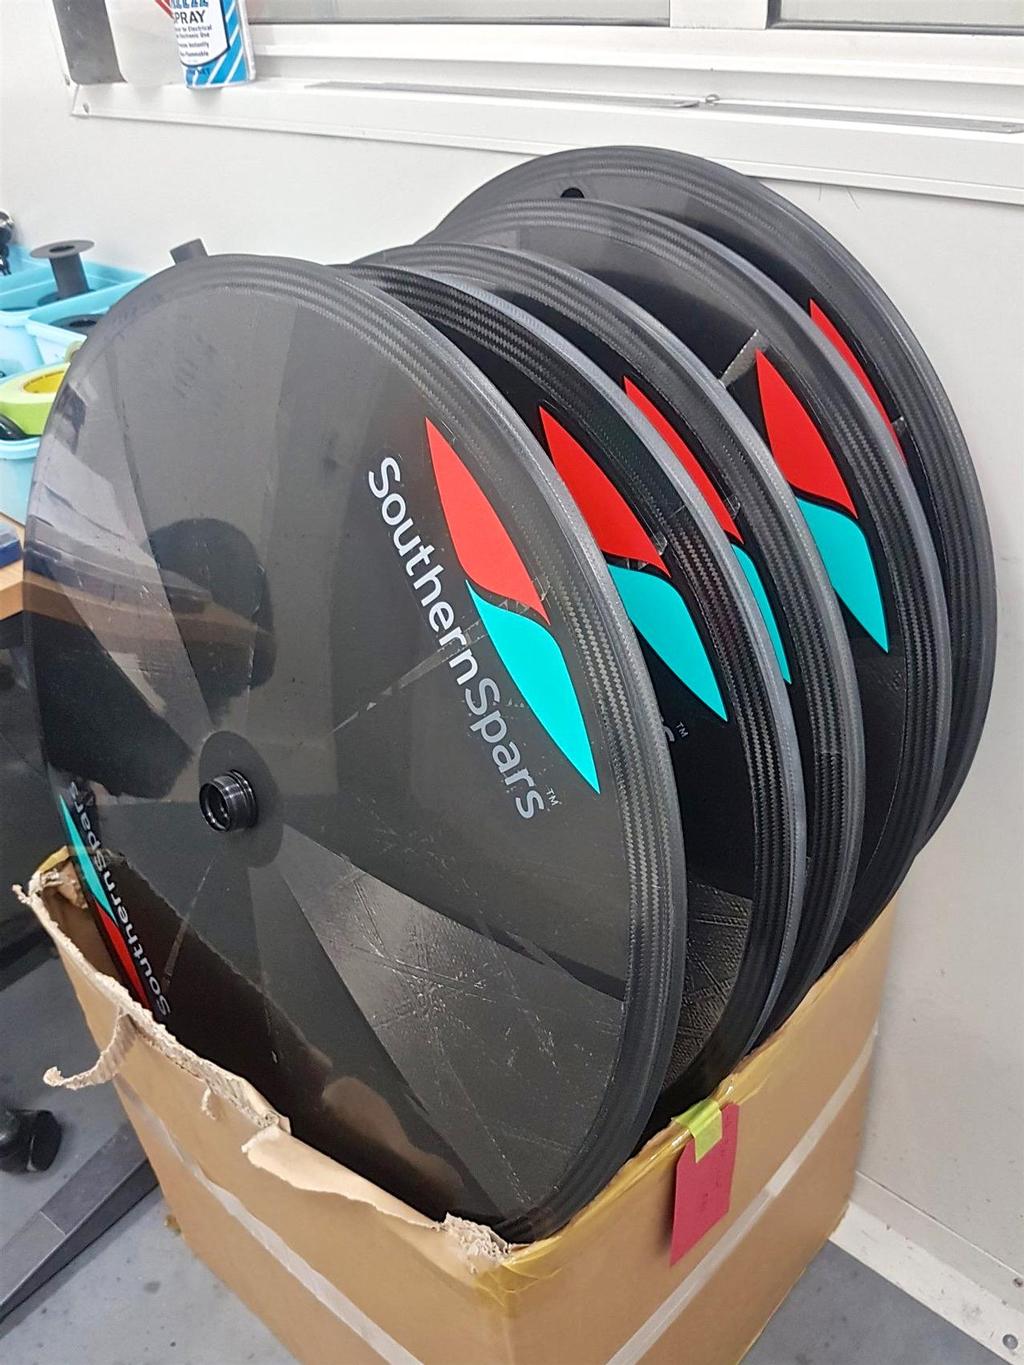 Southern Spars have developed a new improved version of their Olympic cycling wheels which won the 2017 World Championships © Southern Spars